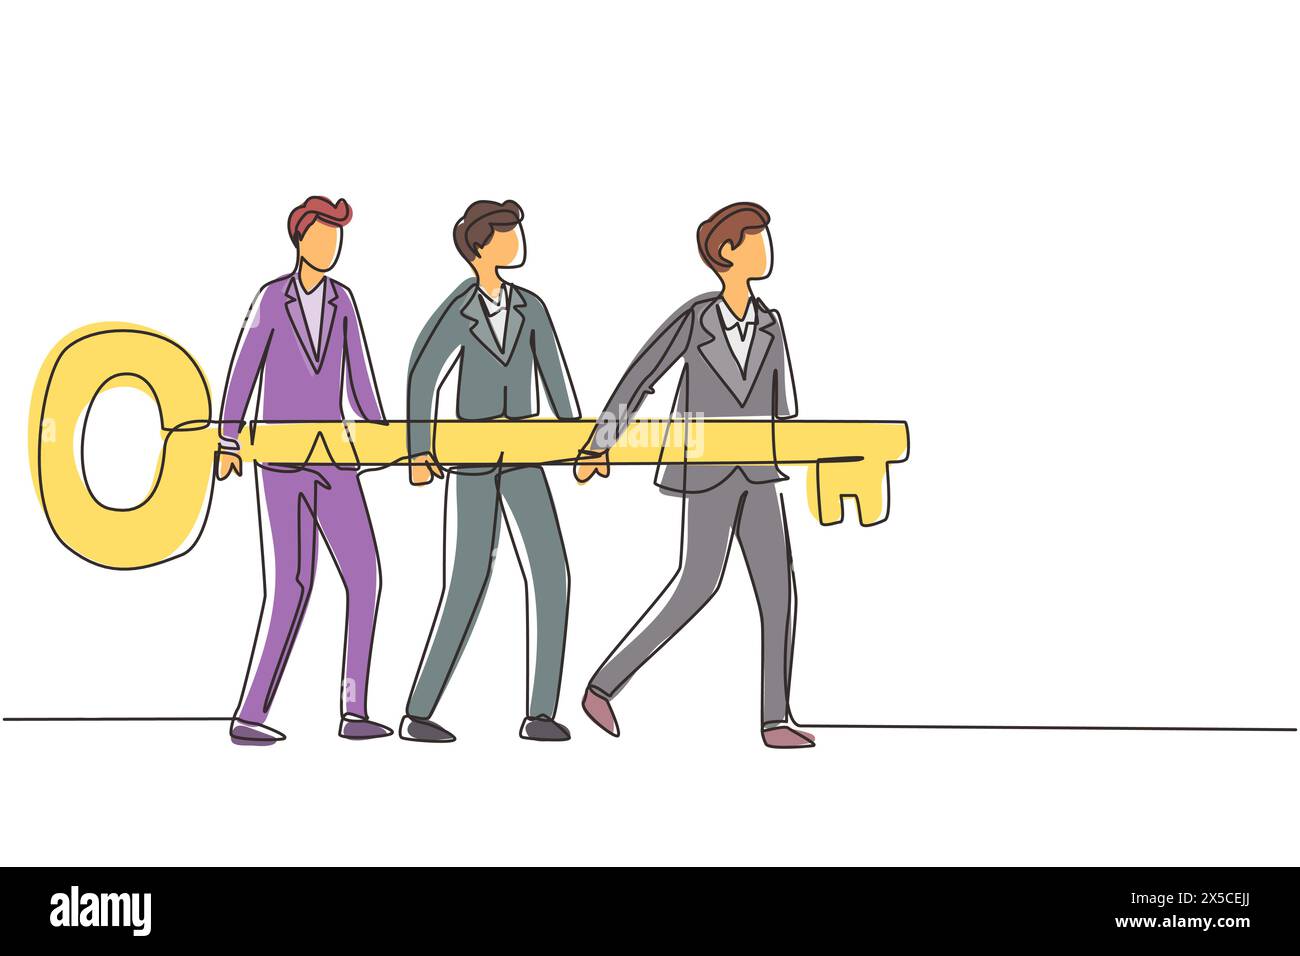 Single continuous line drawing problem solving team of business man with a key solution concept. Businessmen carry big golden key. Build creative peop Stock Vector